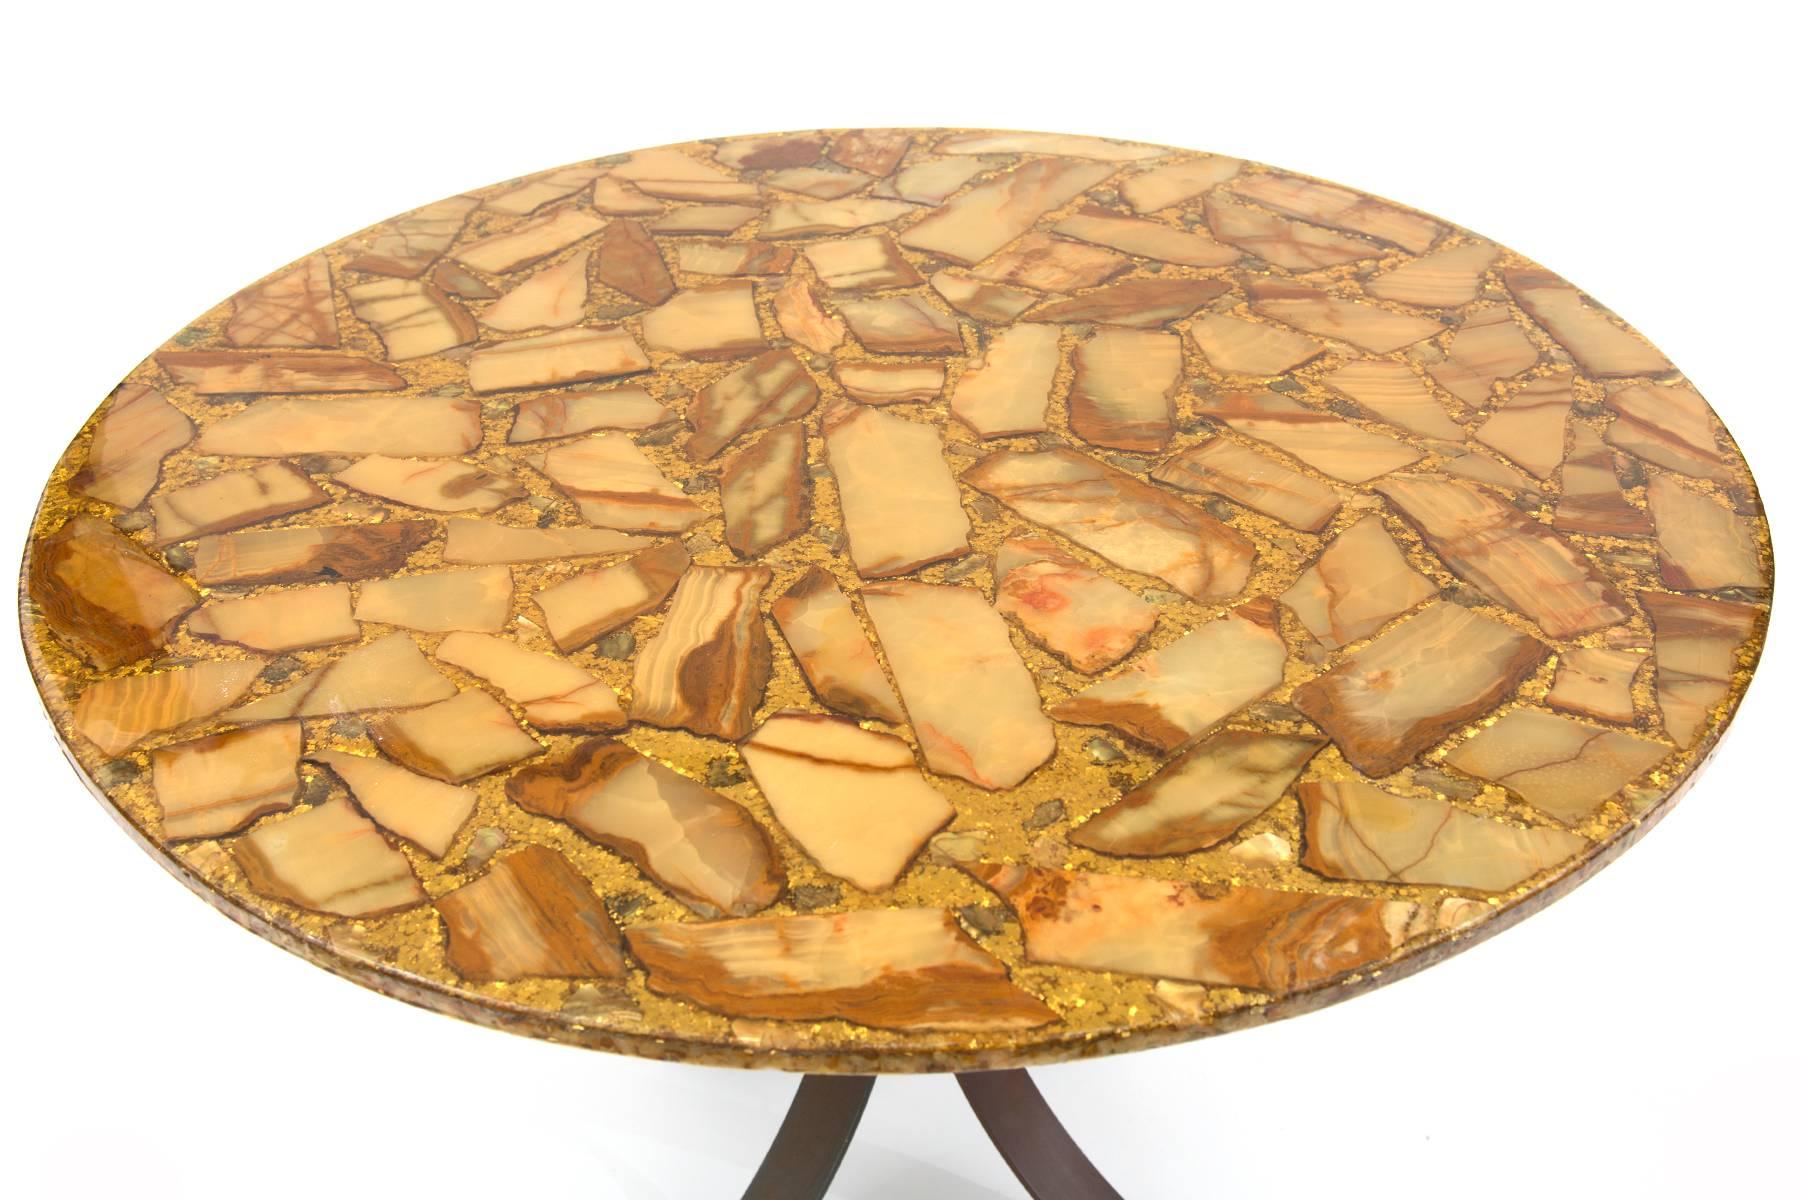 Cut agate and bronze dining table, circa late 1960s. The top of this table has beautifully grained agate pieces and gold flecks beneath resin. The subtly curved steel base is bronze-plated with great patina.